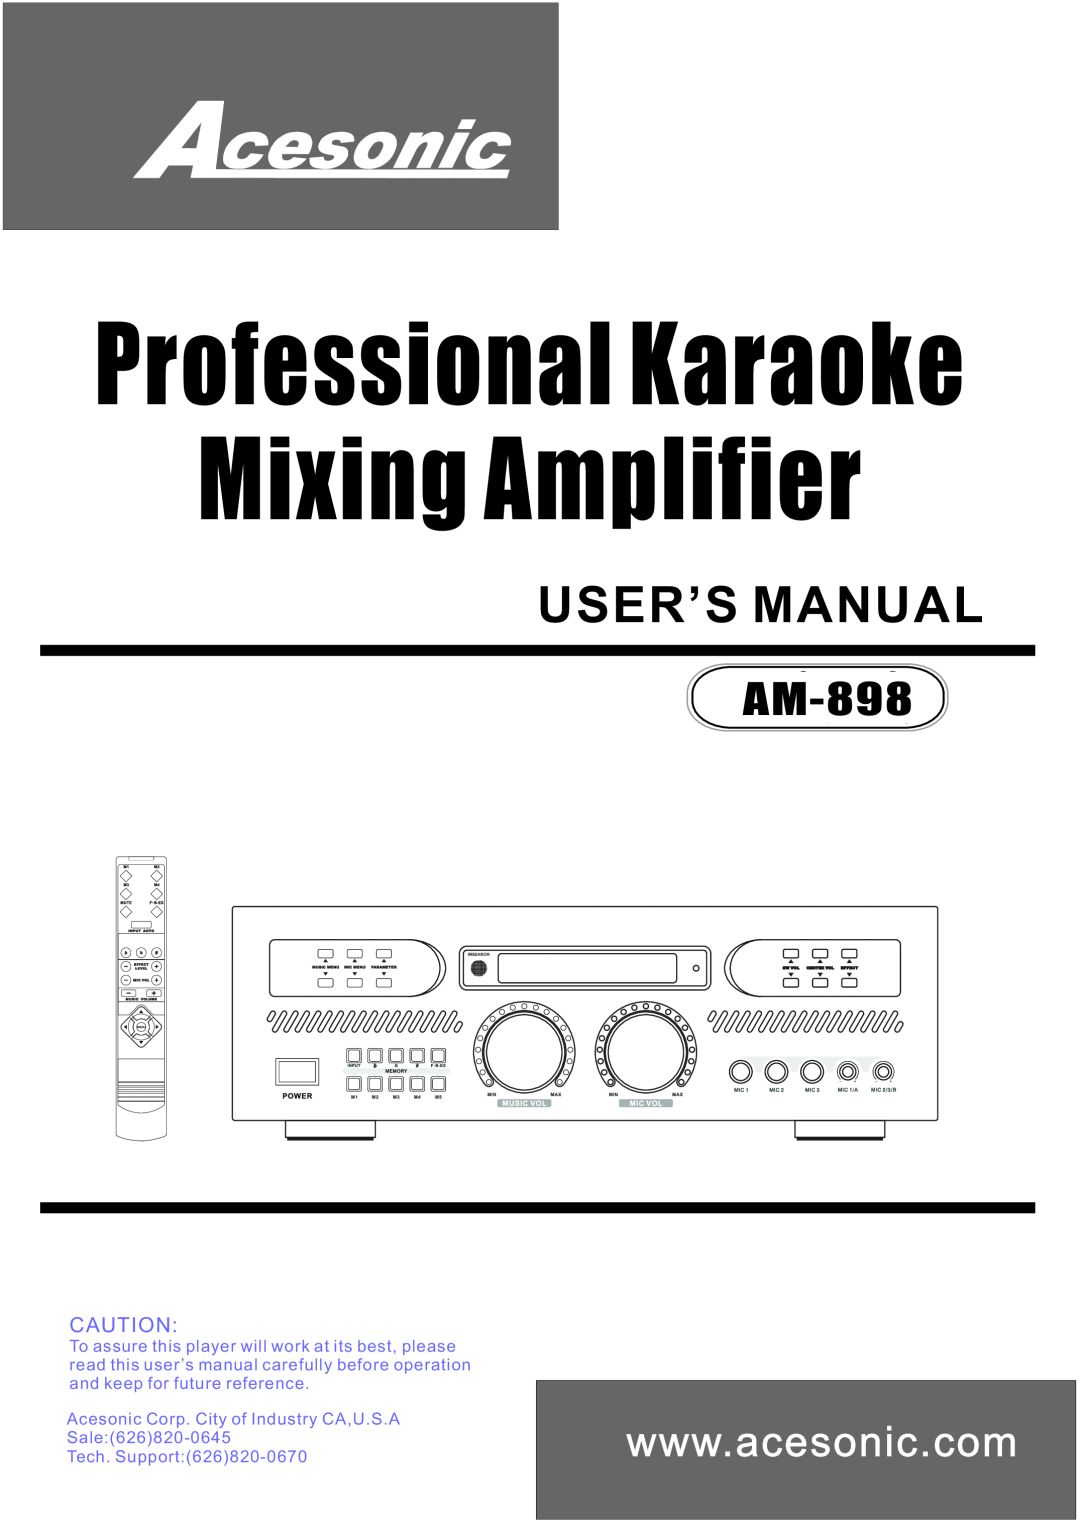 Acesonic AM-898 user manual Professional Karaoke Mixing Amplifier, Acesonic Corp. City of Industry CA,U.S.A 